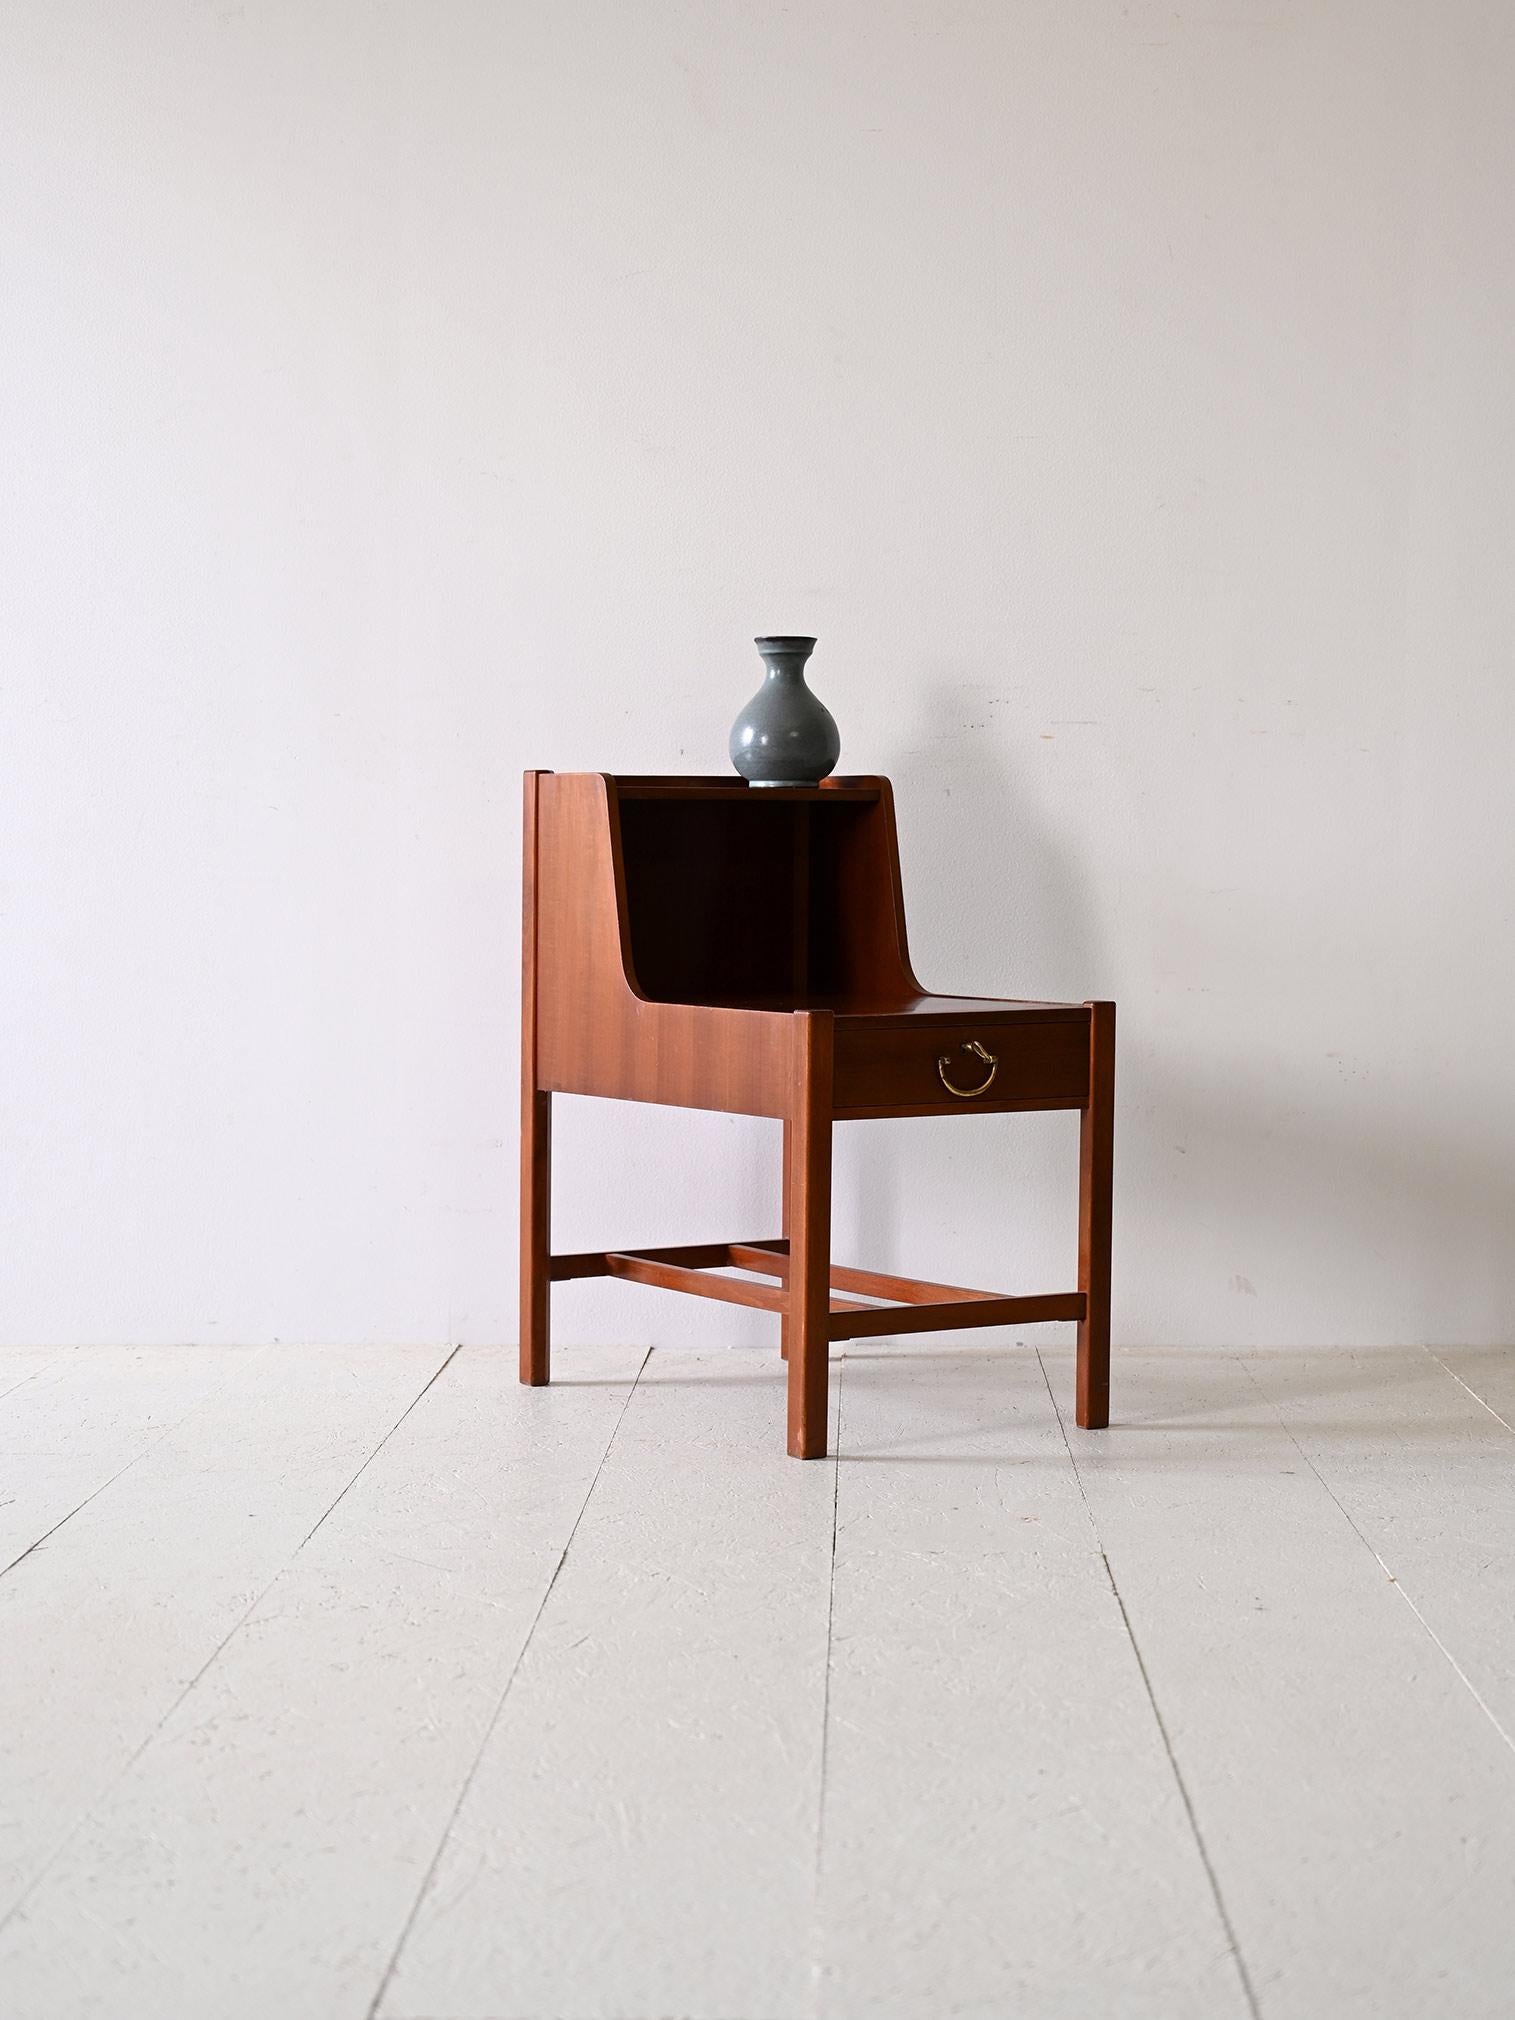 Swedish teak bedside table by David Rosén.

Its unusual shape, given by the double shelf, adds a distinctive touch, making it perfect for placing a lamp on the first shelf and keeping the second shelf free for other items. Square legs lend stability